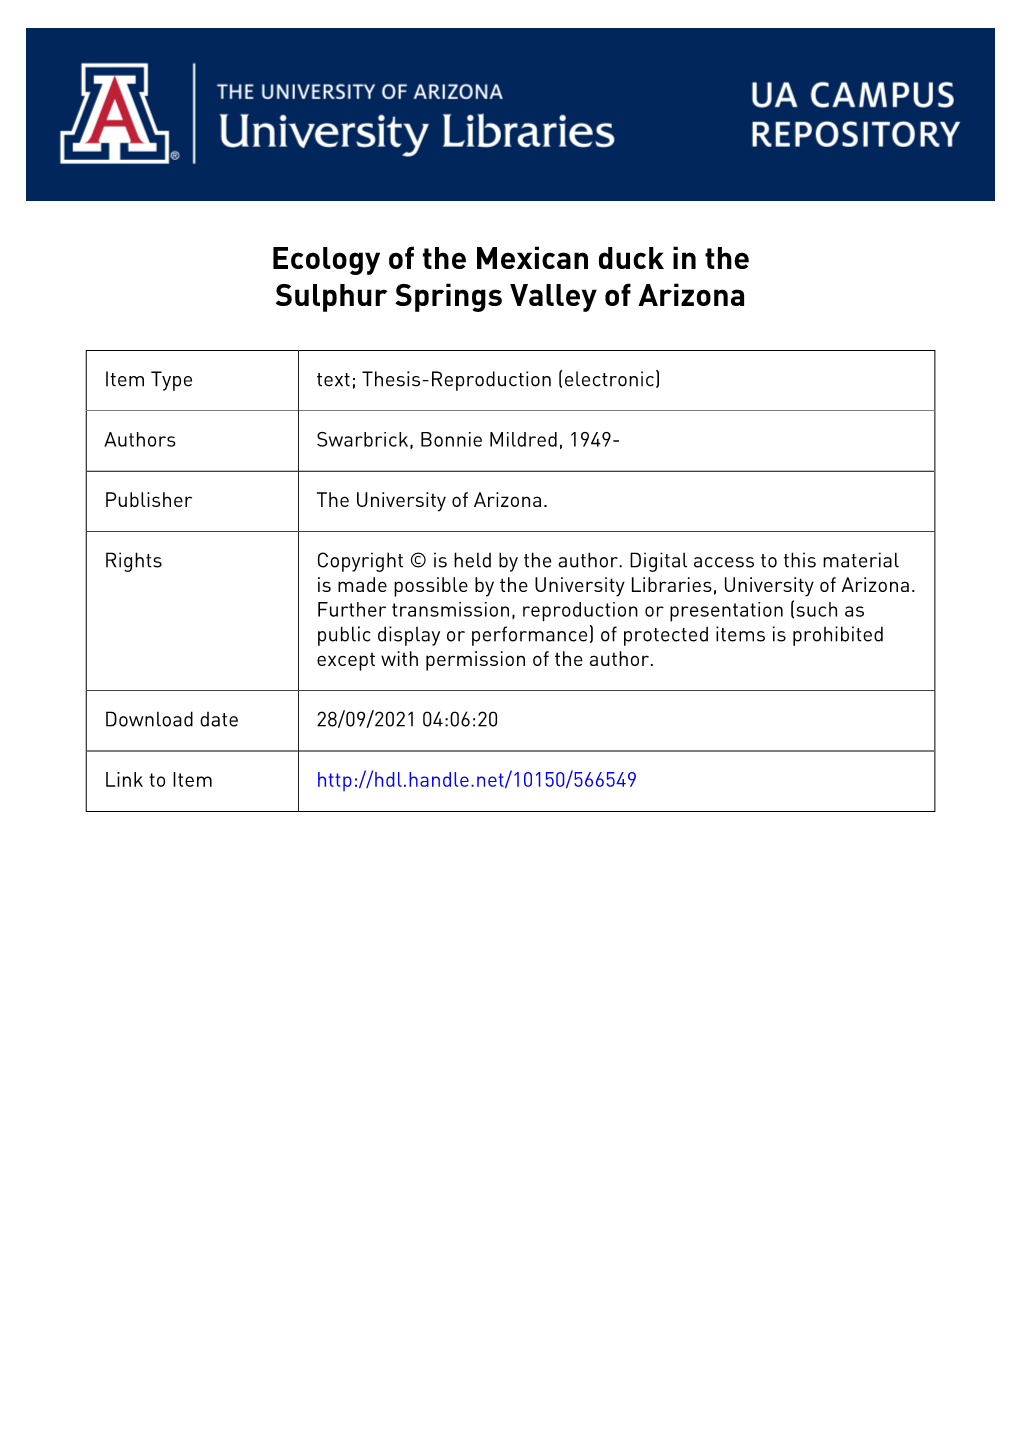 Ecology of the Mexican Duck in the Sulphur Springs Valley of Arizona